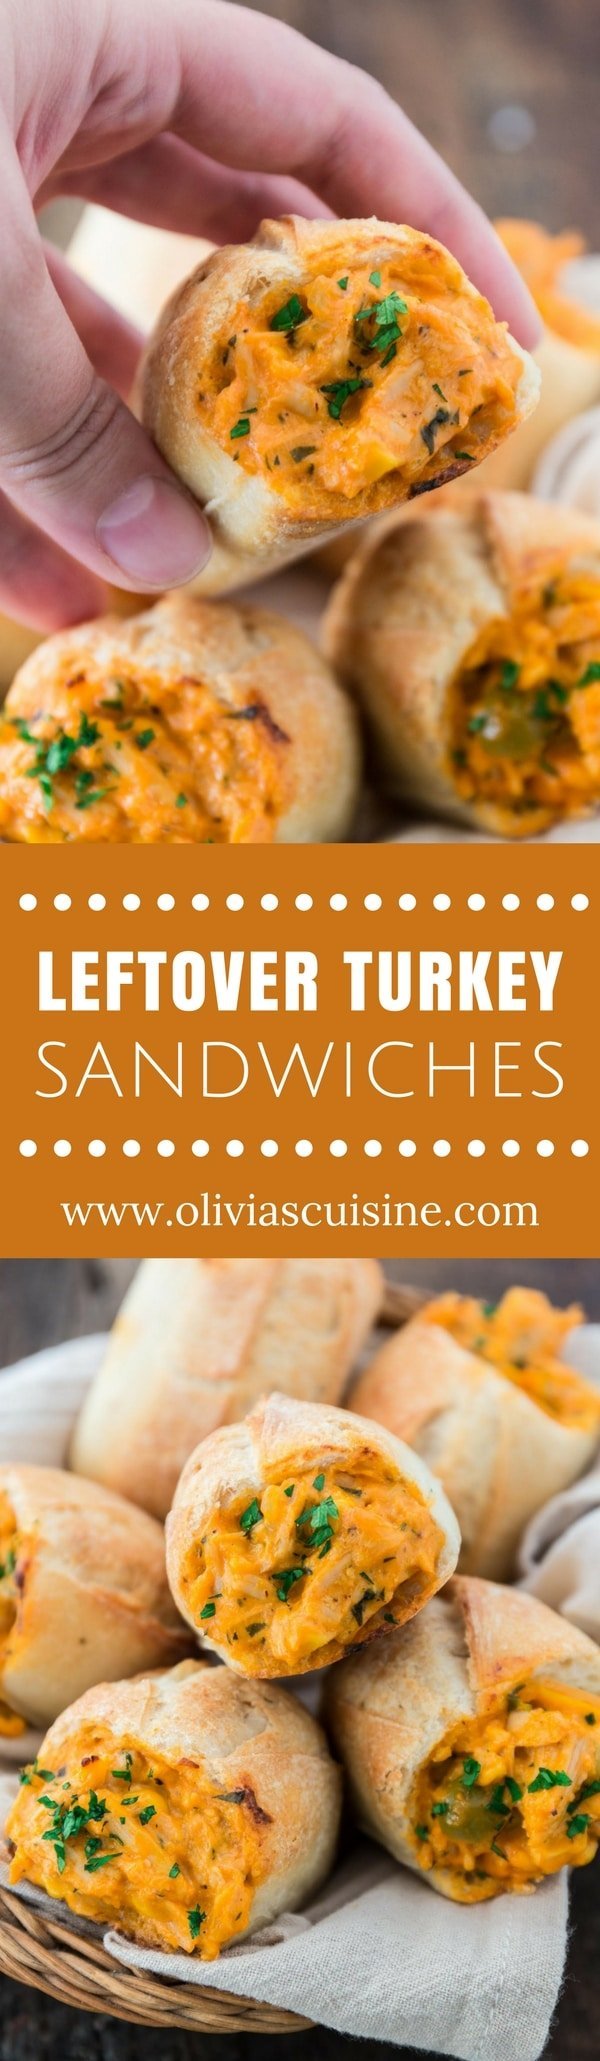 Fricassee Leftover Turkey Sandwiches | www.oliviascuisine.com | Tired of the same old boring leftover turkey recipes? You should try these fricassee leftover turkey sandwiches! Creamy, cheesy and beyond delicious. So good that you will actually look forward to the day after Thanksgiving! (Recipe and food photography by @oliviascuisine.)